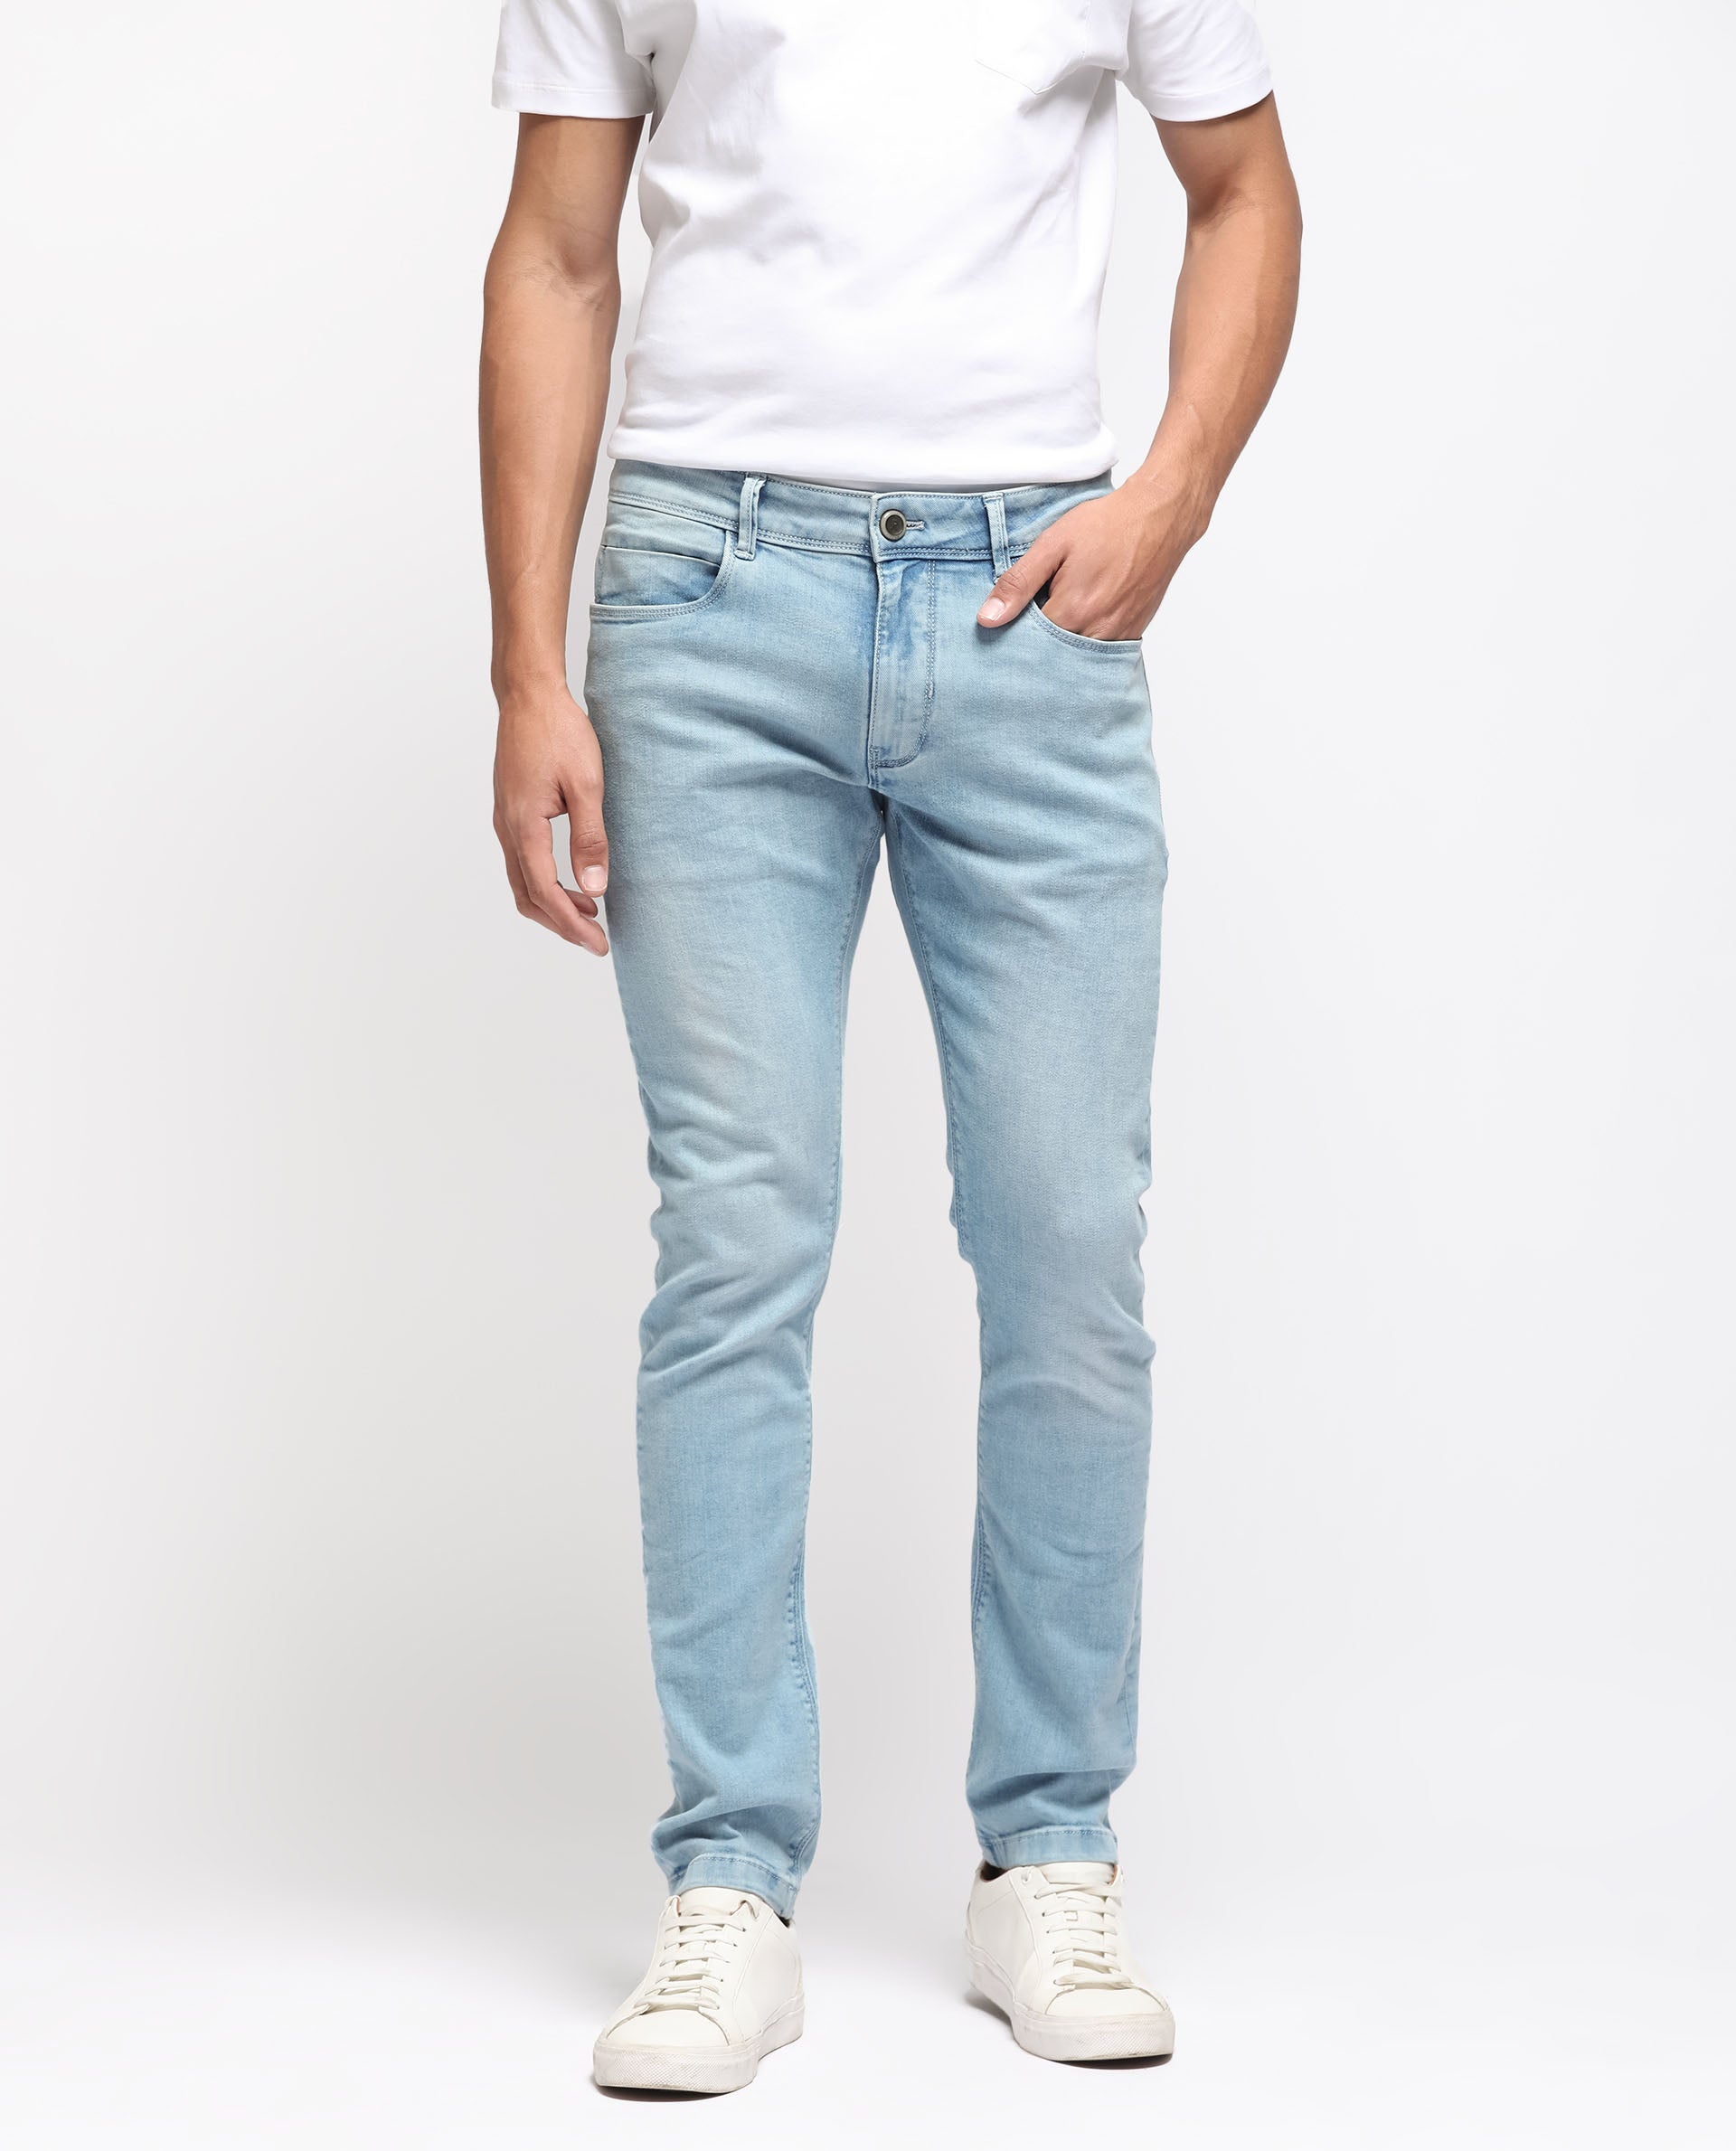 How to Beat the Heat in Men's Lightweight Jeans | 34 Heritage Blog